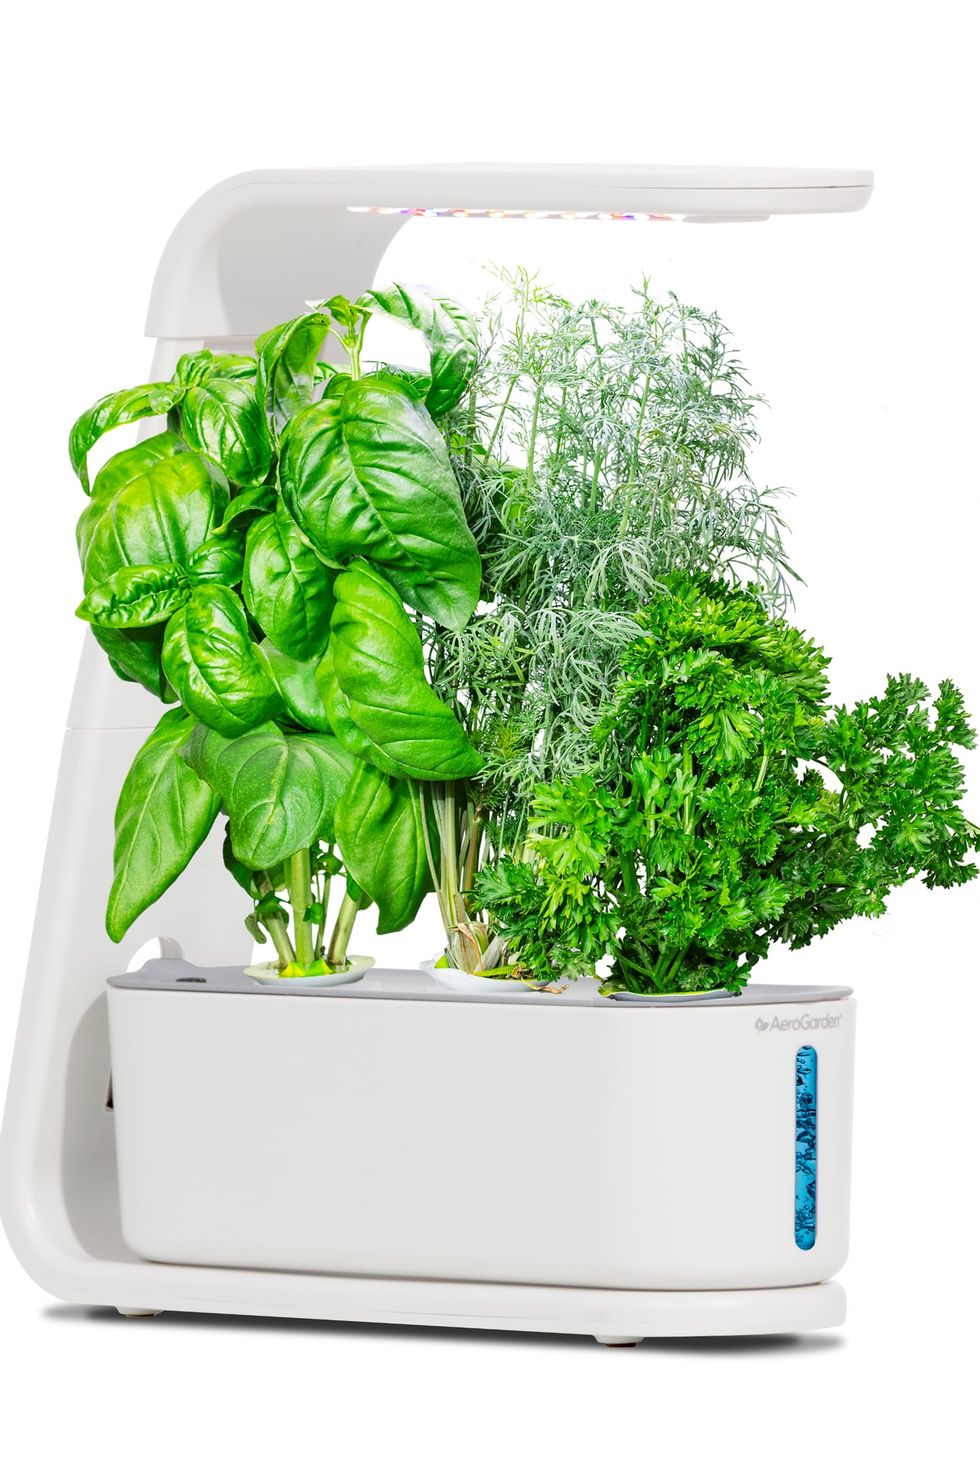 AeroGarden Sprout LED Hydroponic System